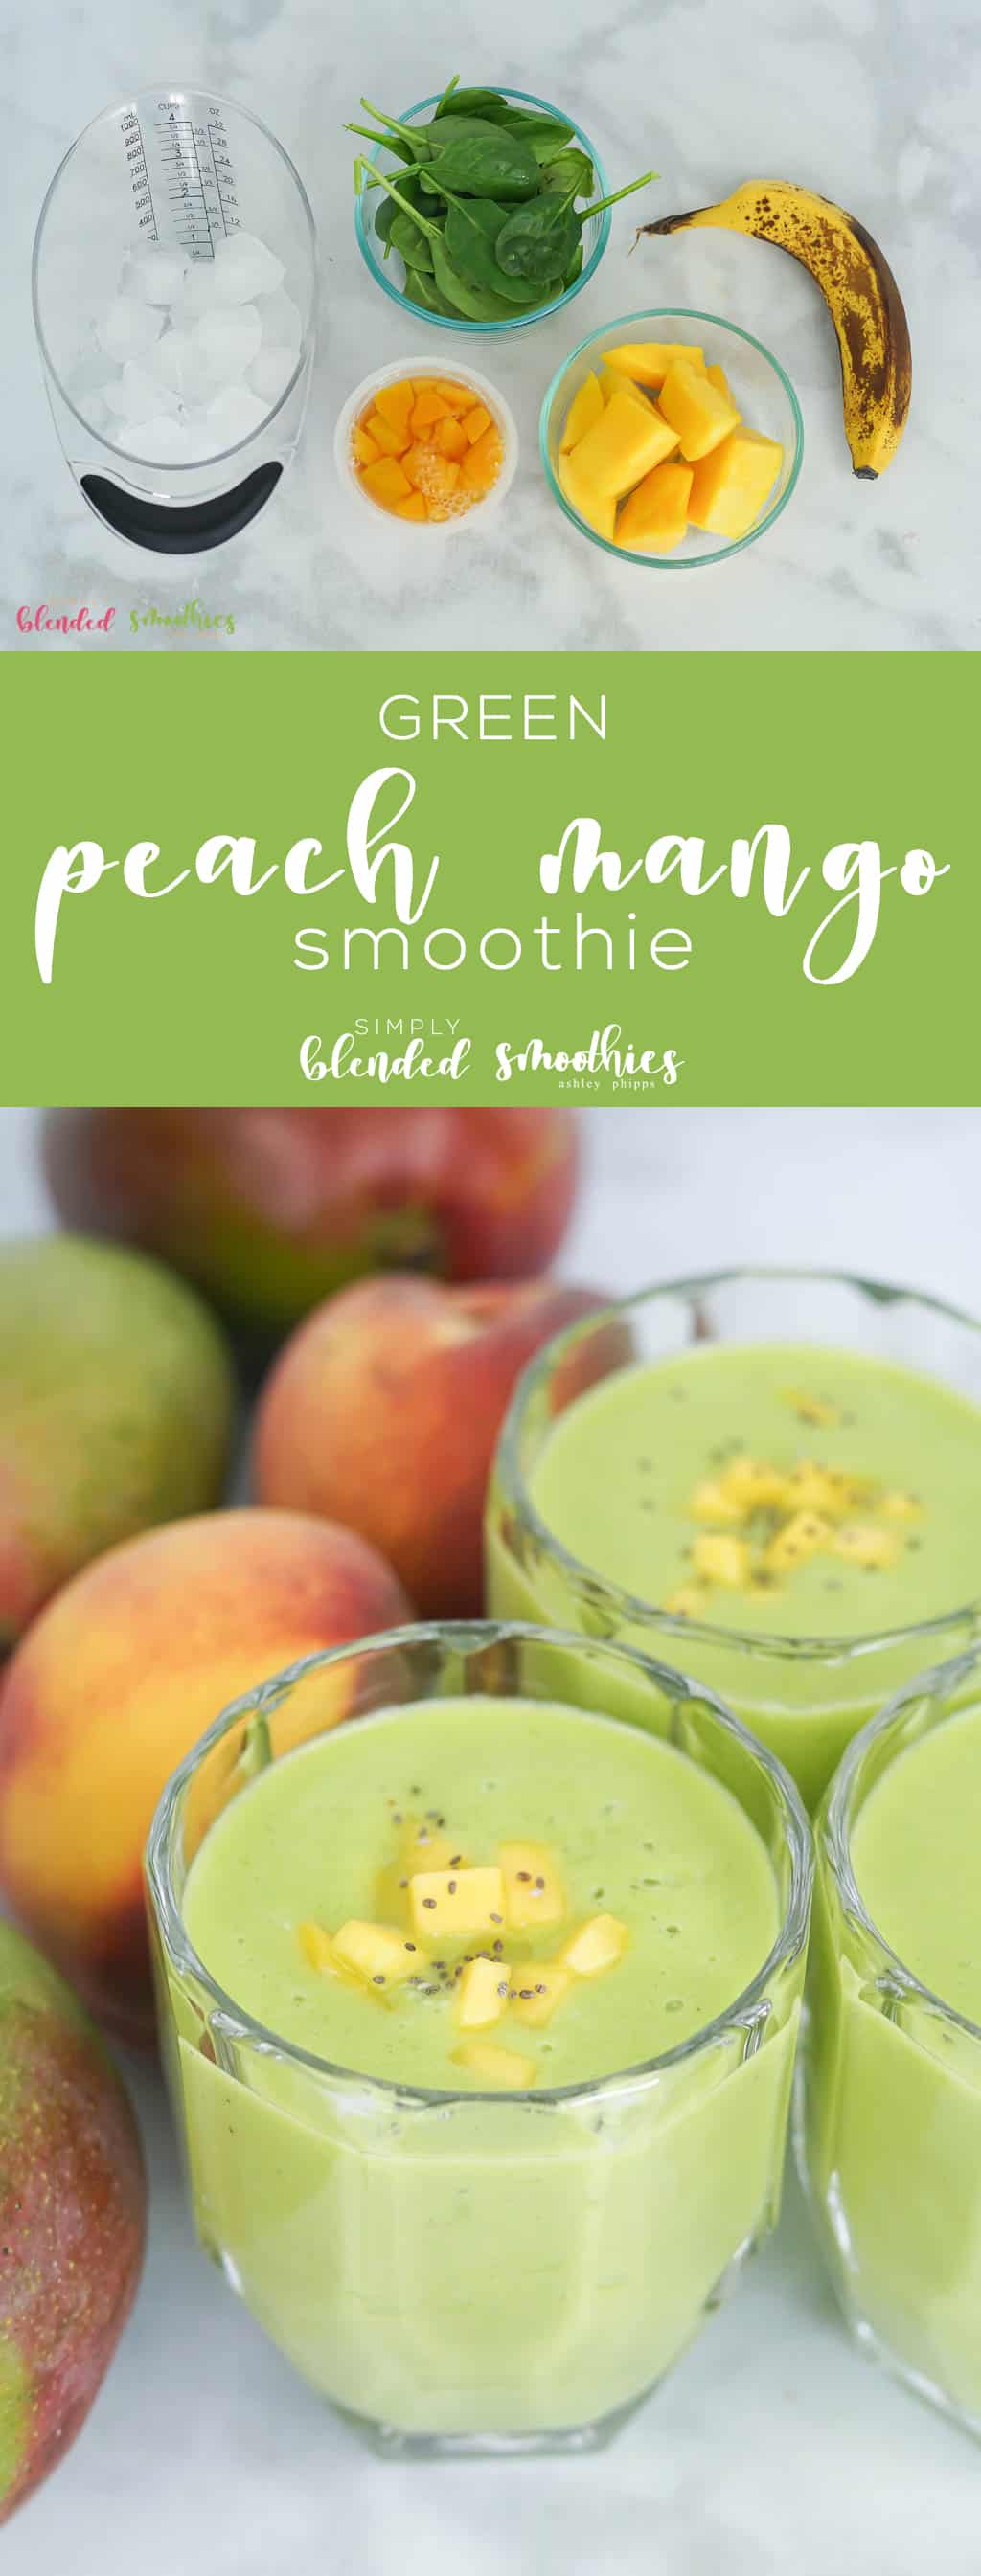 Green Peach Mango Smoothie - This Delicious Green Peach Mango Smoothie Tastes Like A Tropical Treat And Is A Healthy And Nutrient-Rich Was To Begin Your Day